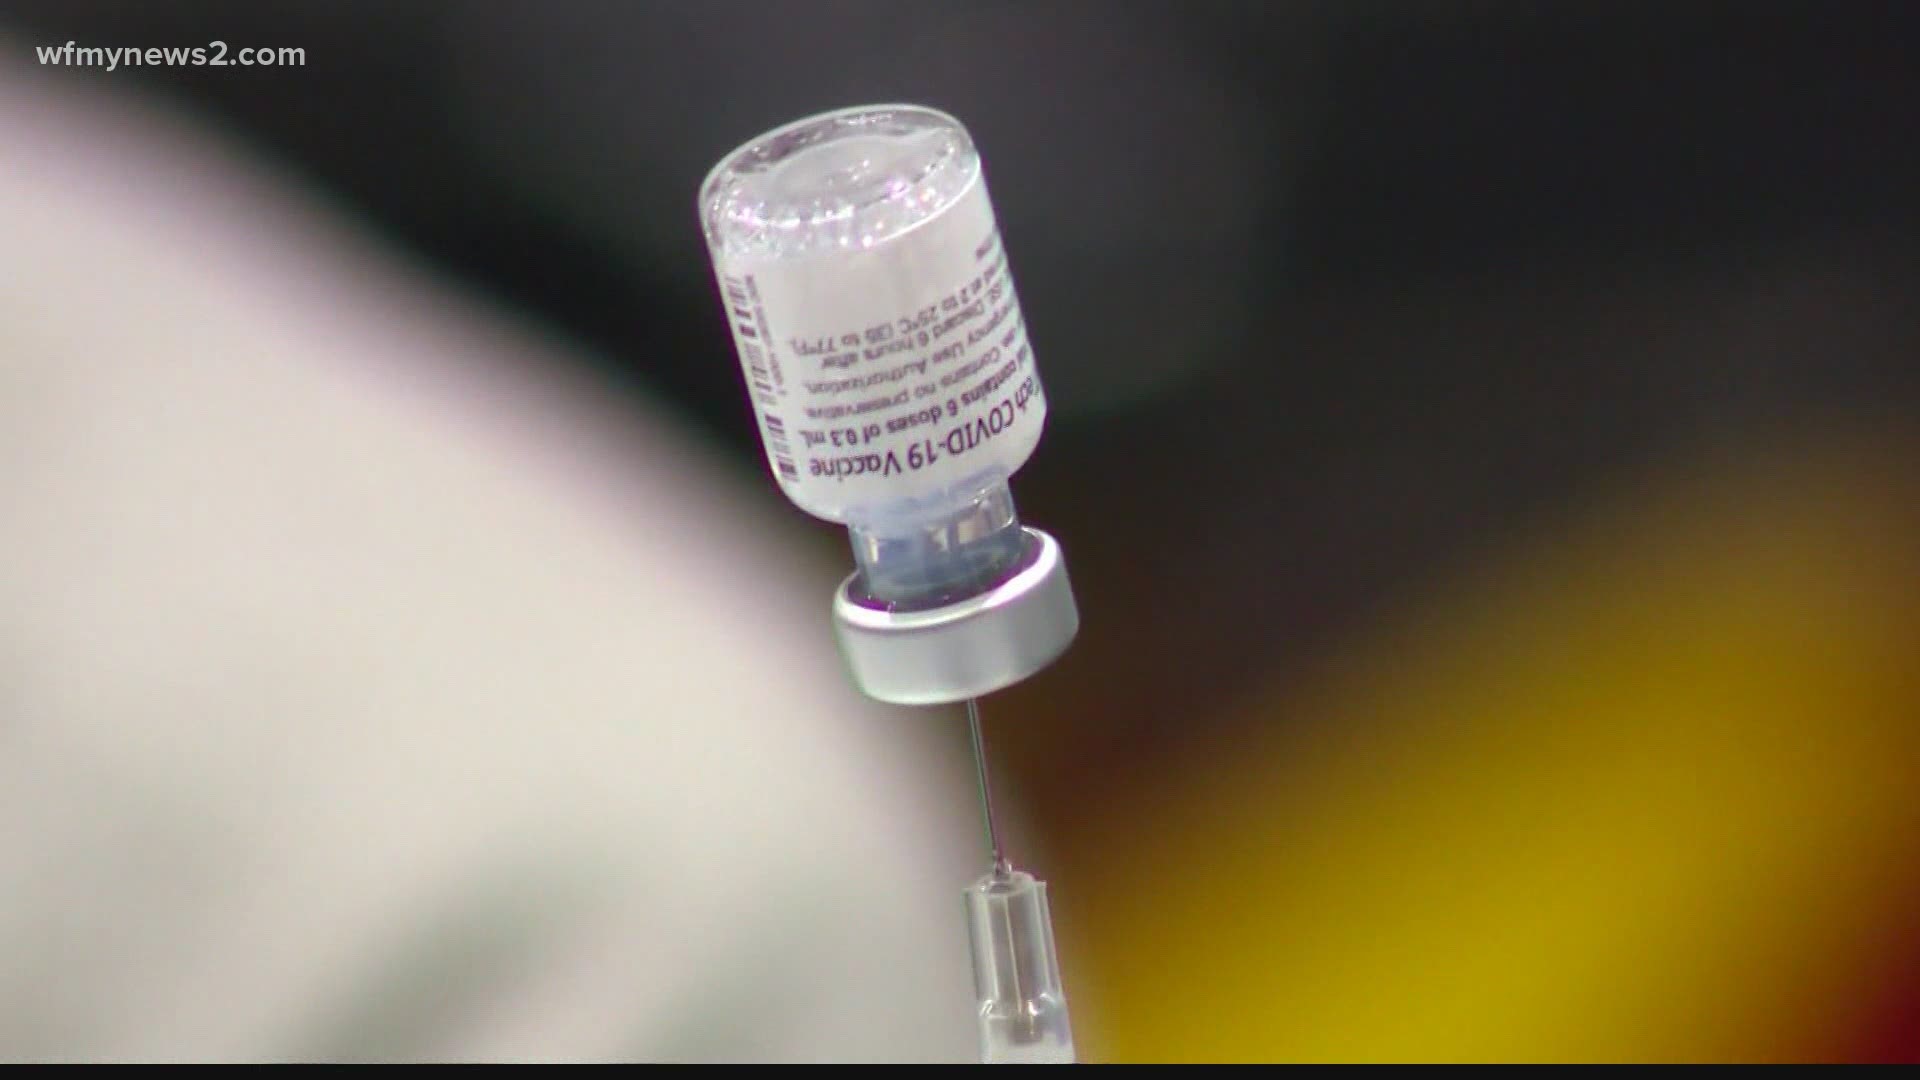 Today the state says 7.6 million doses of the vaccine have been given out. Still less than half of adults are fully vaccinated.